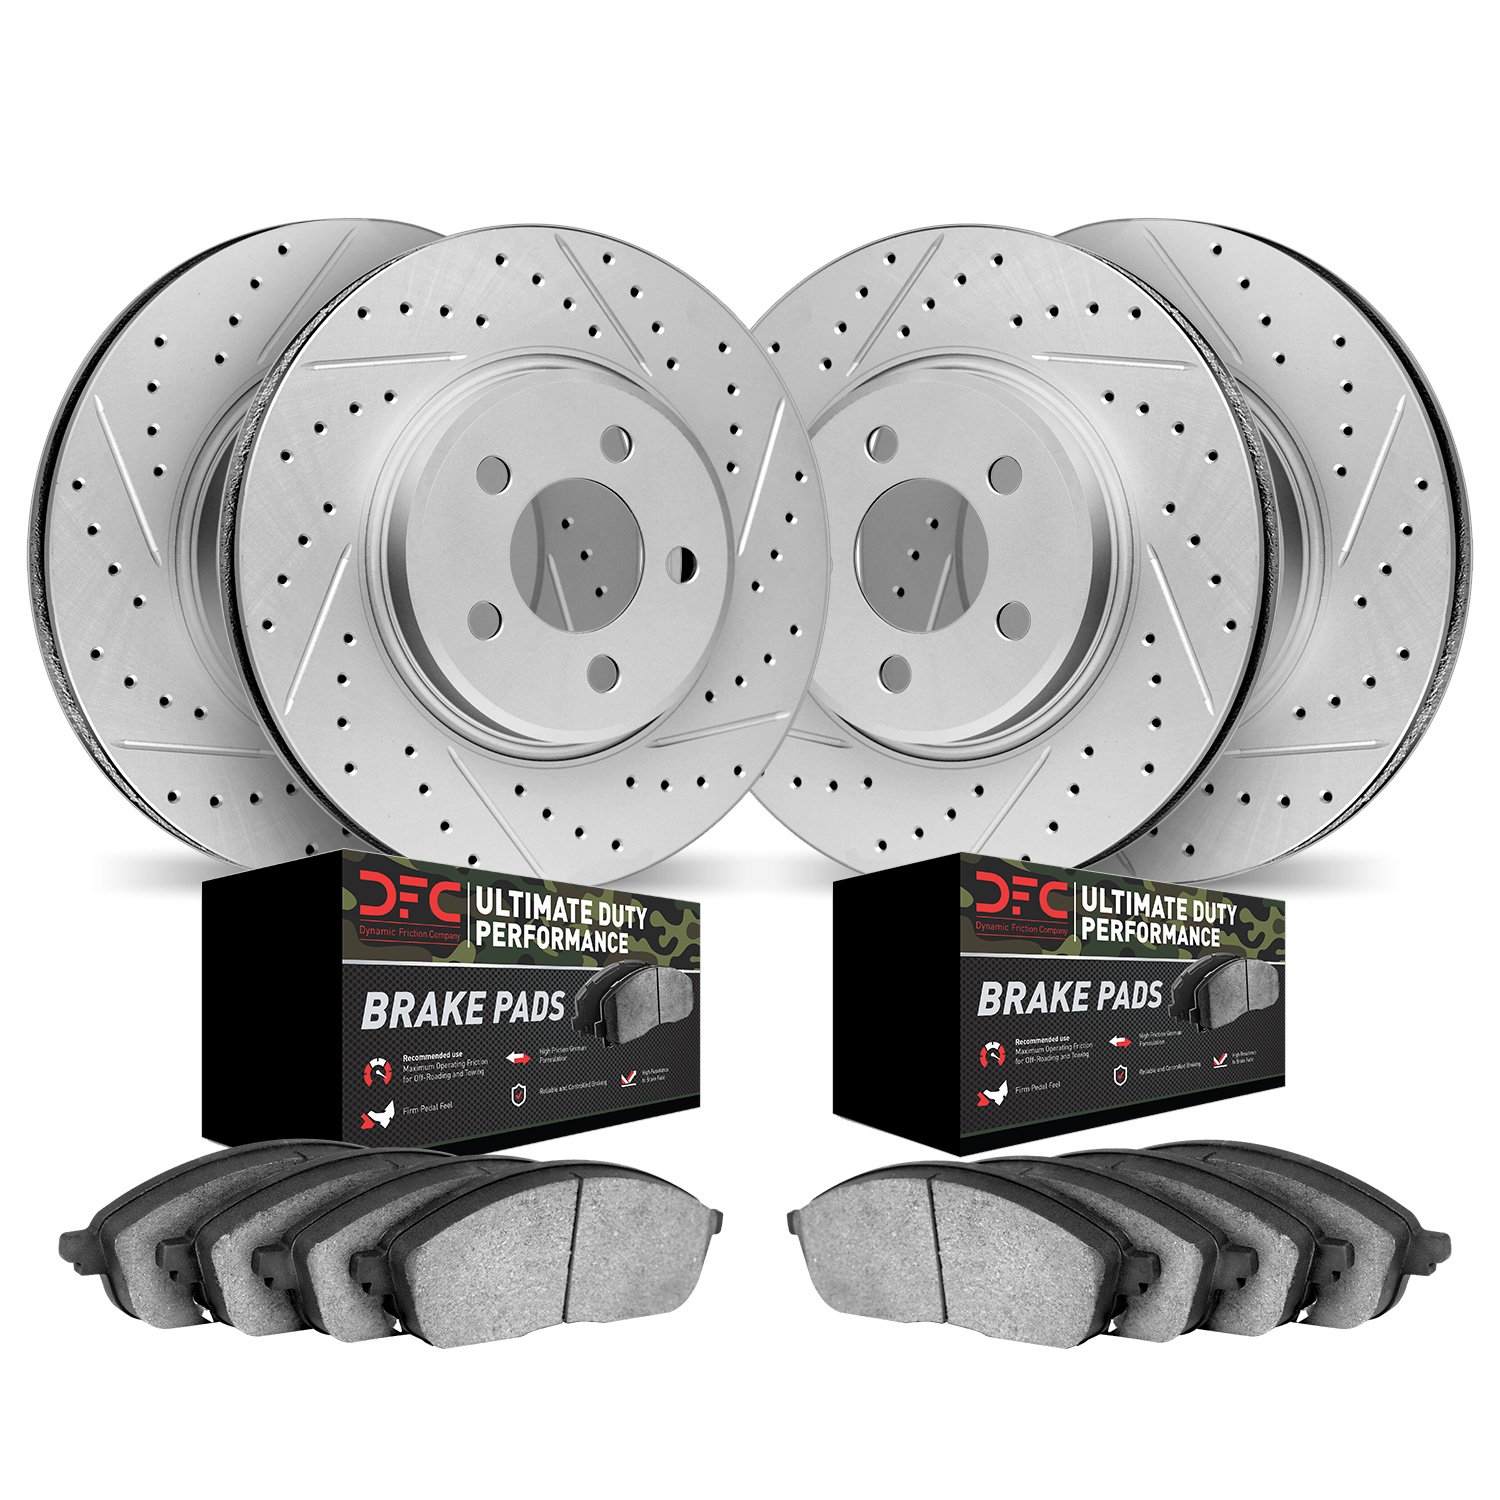 2404-42004 Geoperformance Drilled/Slotted Brake Rotors with Ultimate-Duty Brake Pads Kit, Fits Select Mopar, Position: Front and